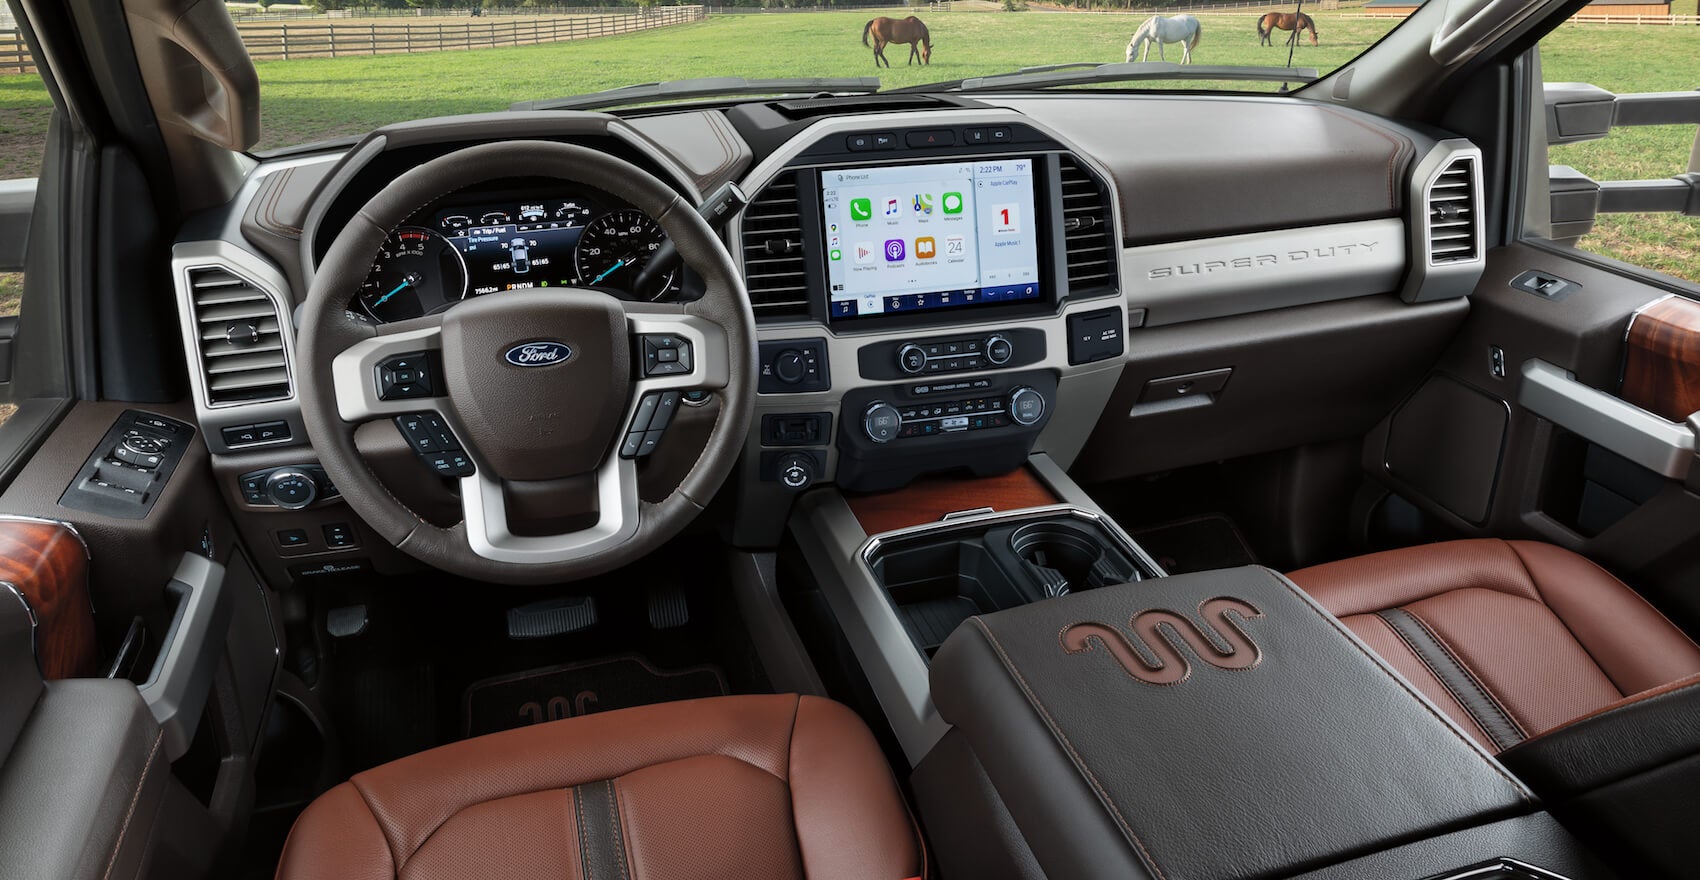 Ford F-250 Super Duty interior features